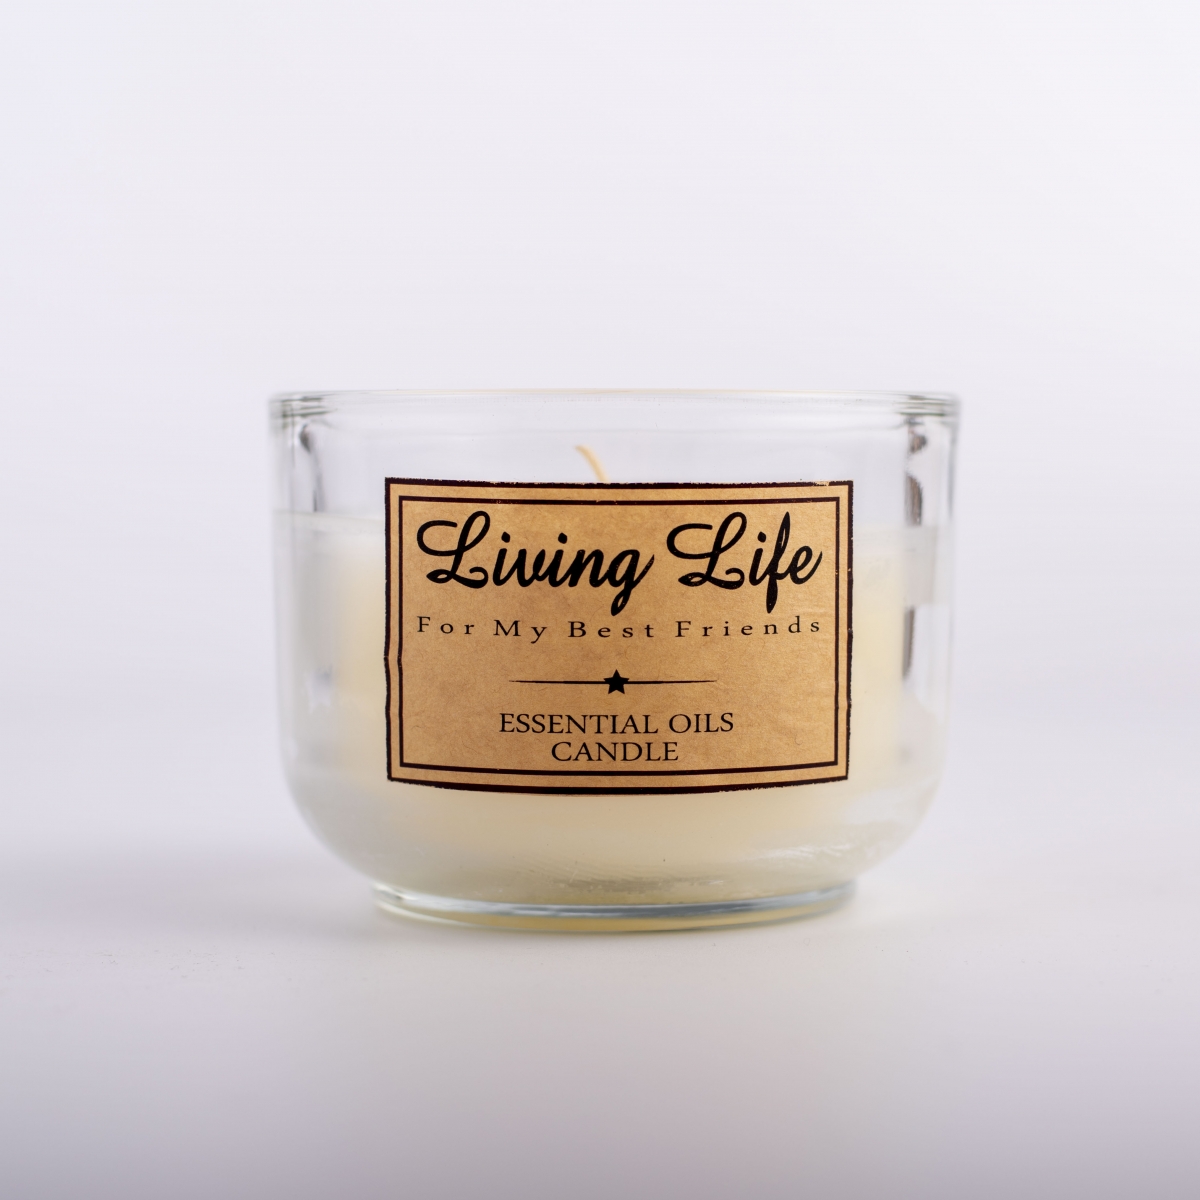 I-Soy Candle Supply Daily Aromatherapy Transparent Thick Wall Glass Jar Private Label China Factory Wholesale Price-HOWCANDLE-Amakhandlela anephunga elimnandi,Amakhandlela eSoy,Amakhandlela eNyosi,Amakhandlela akhanyisa itiye,Amakhandlela eCitronella,Amakhandlela kathini,Amakhandlela kaJar,Amakhandlela eTaper,Amakhandlela eNsika ,Gift Set Candles,Wooden Wicks Candles,Tom Ford Candles,Man Candles,Assential Oils,Perfume Oils,Amafutha Ephunga,Reed Diffuser,Oil Diffusers,Candle holder,Wax Warmer,